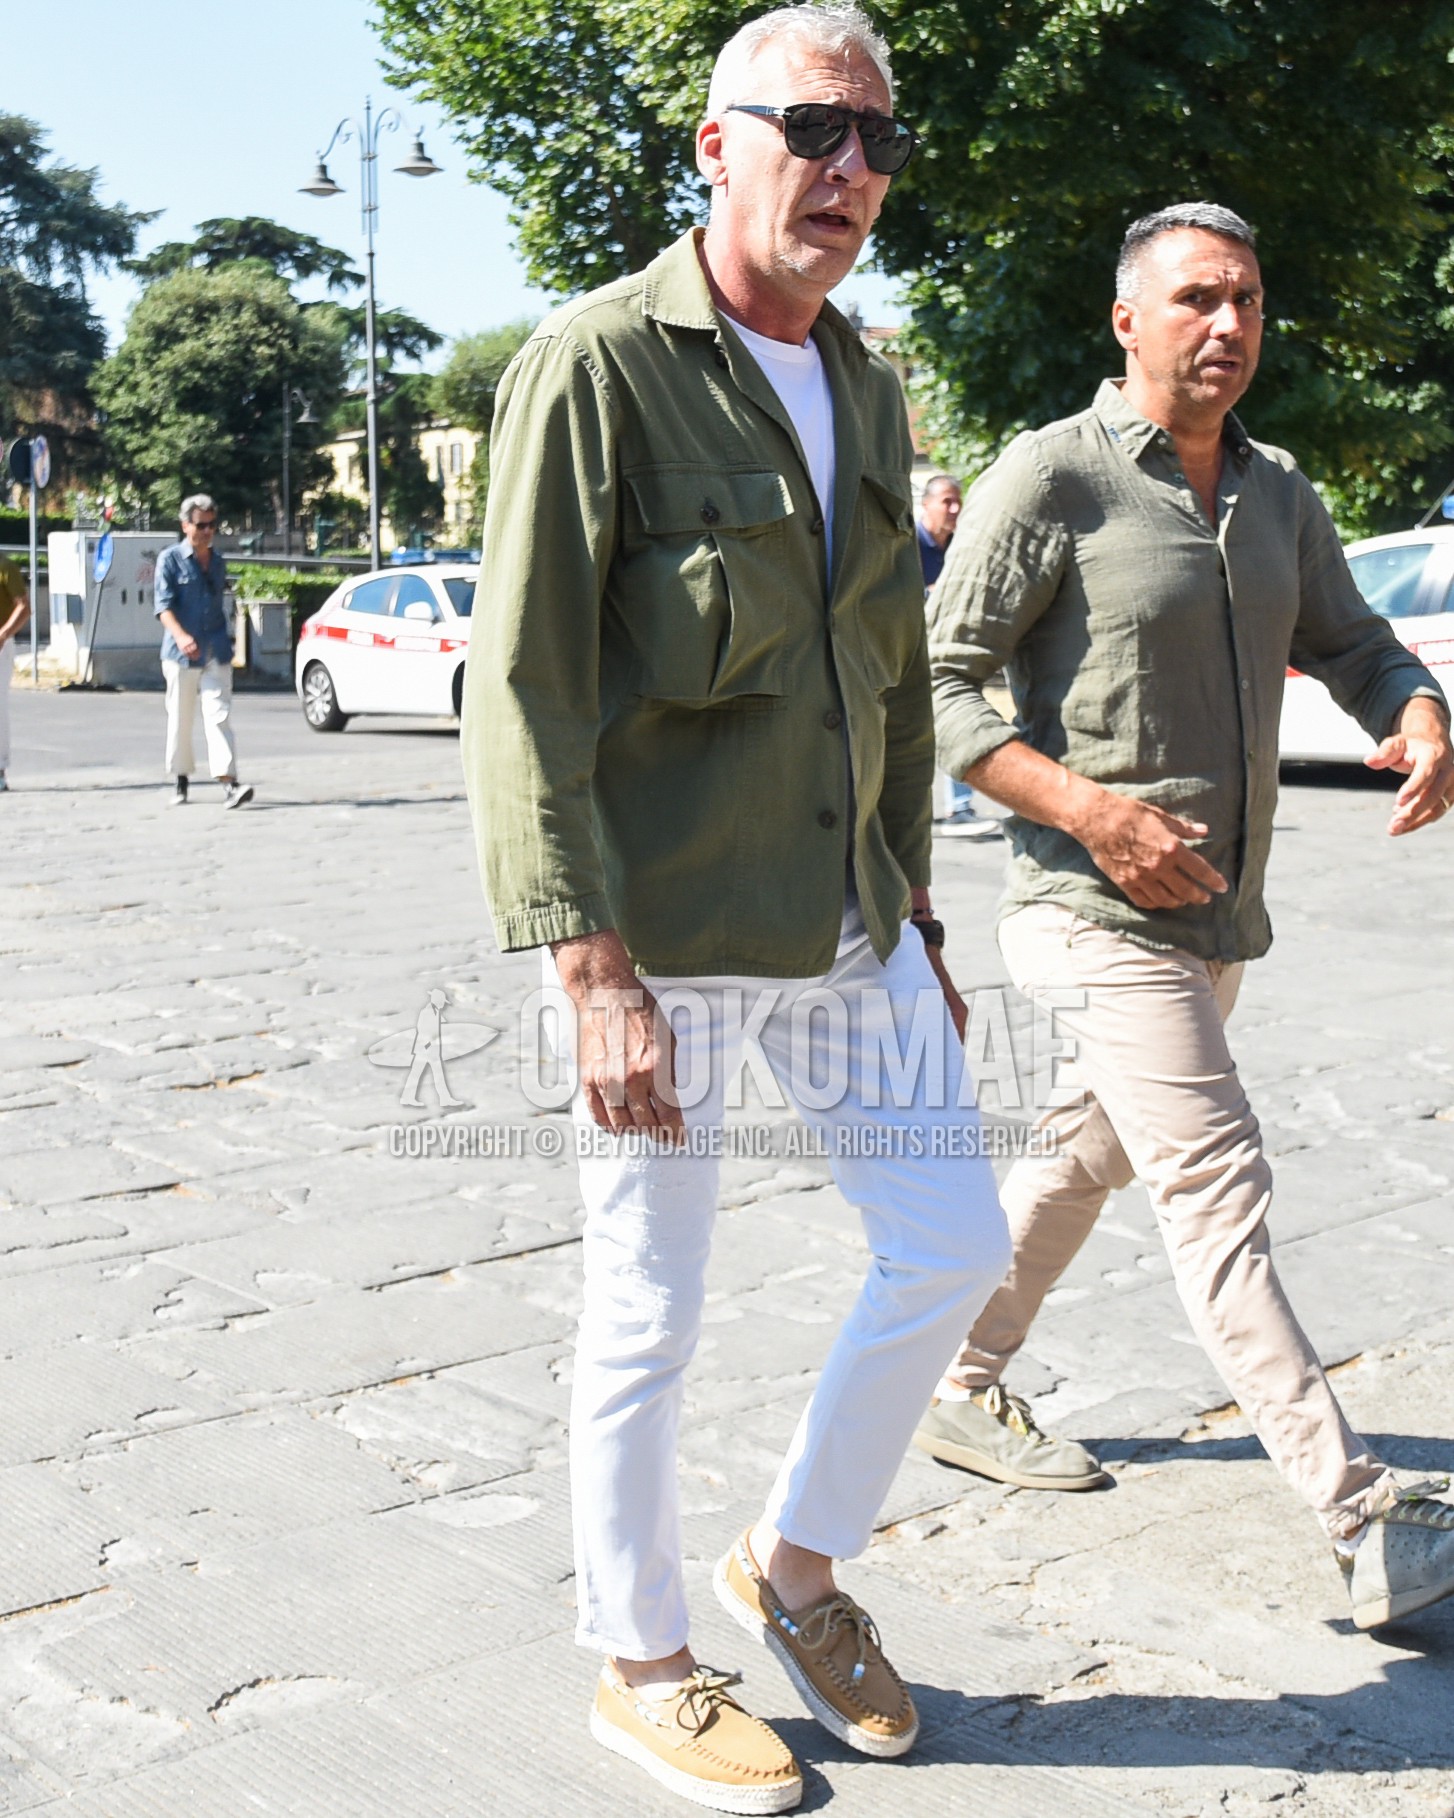 Men's spring summer outfit with black plain sunglasses, olive green plain field jacket/hunting jacket, white plain t-shirt, white plain cotton pants, beige moccasins/deck shoes leather shoes.